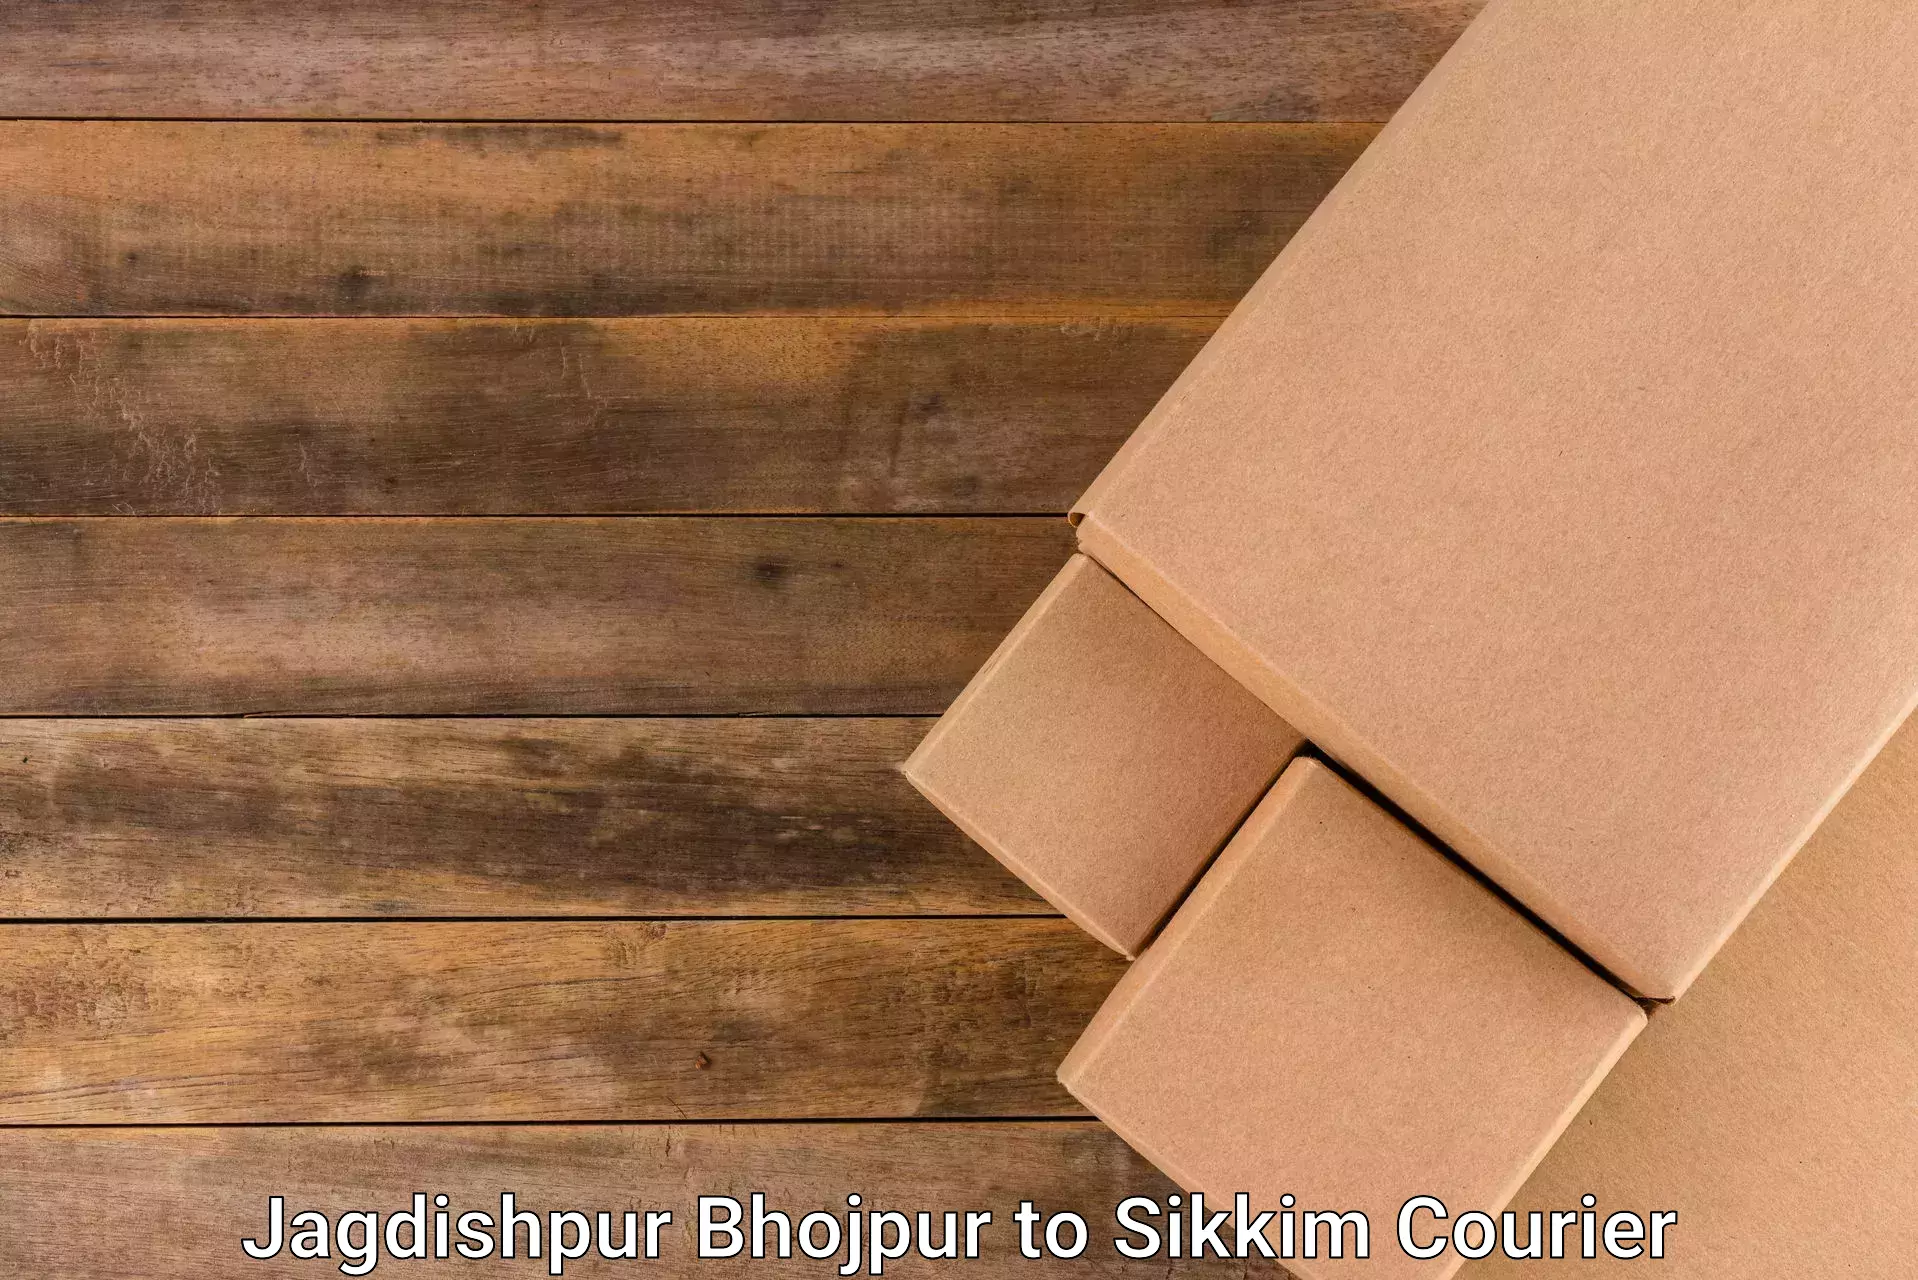 Enhanced tracking features Jagdishpur Bhojpur to Sikkim